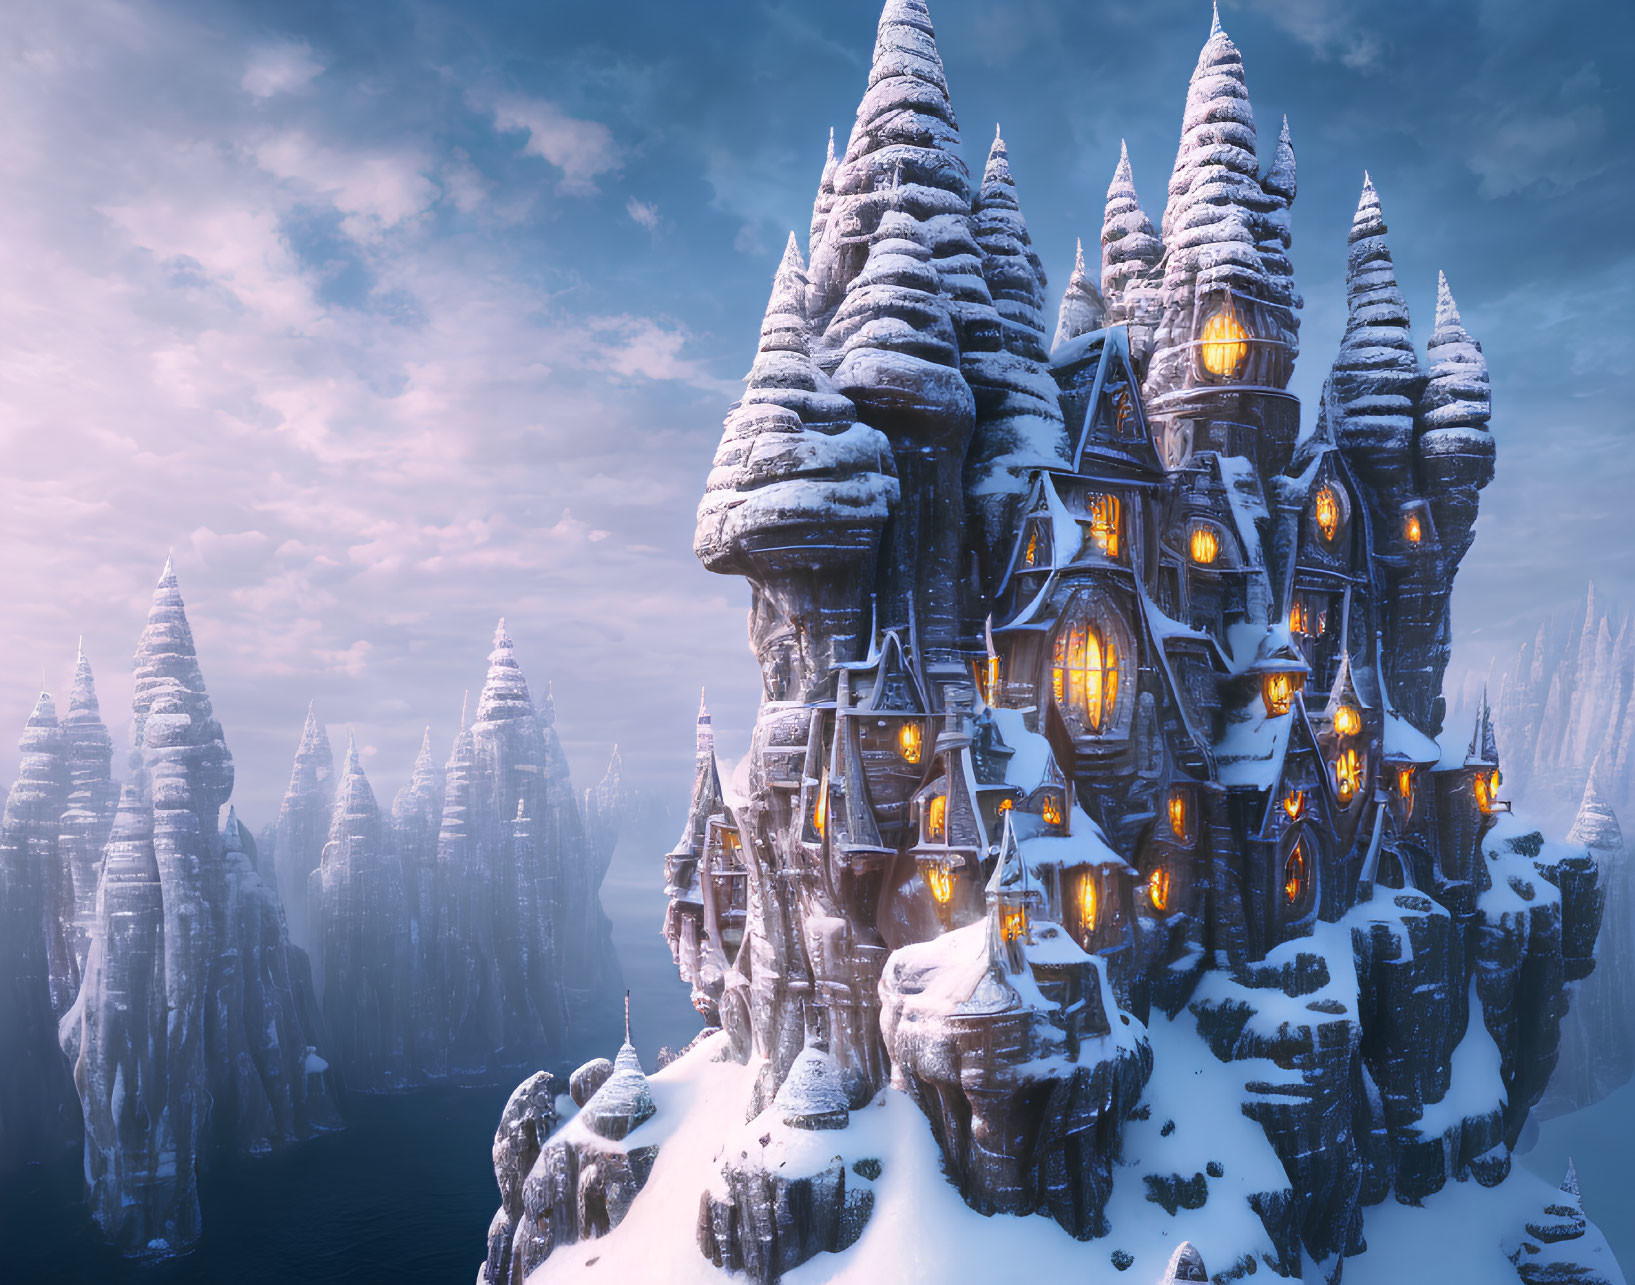 Snow-covered castle on jagged cliffs with glowing windows at twilight